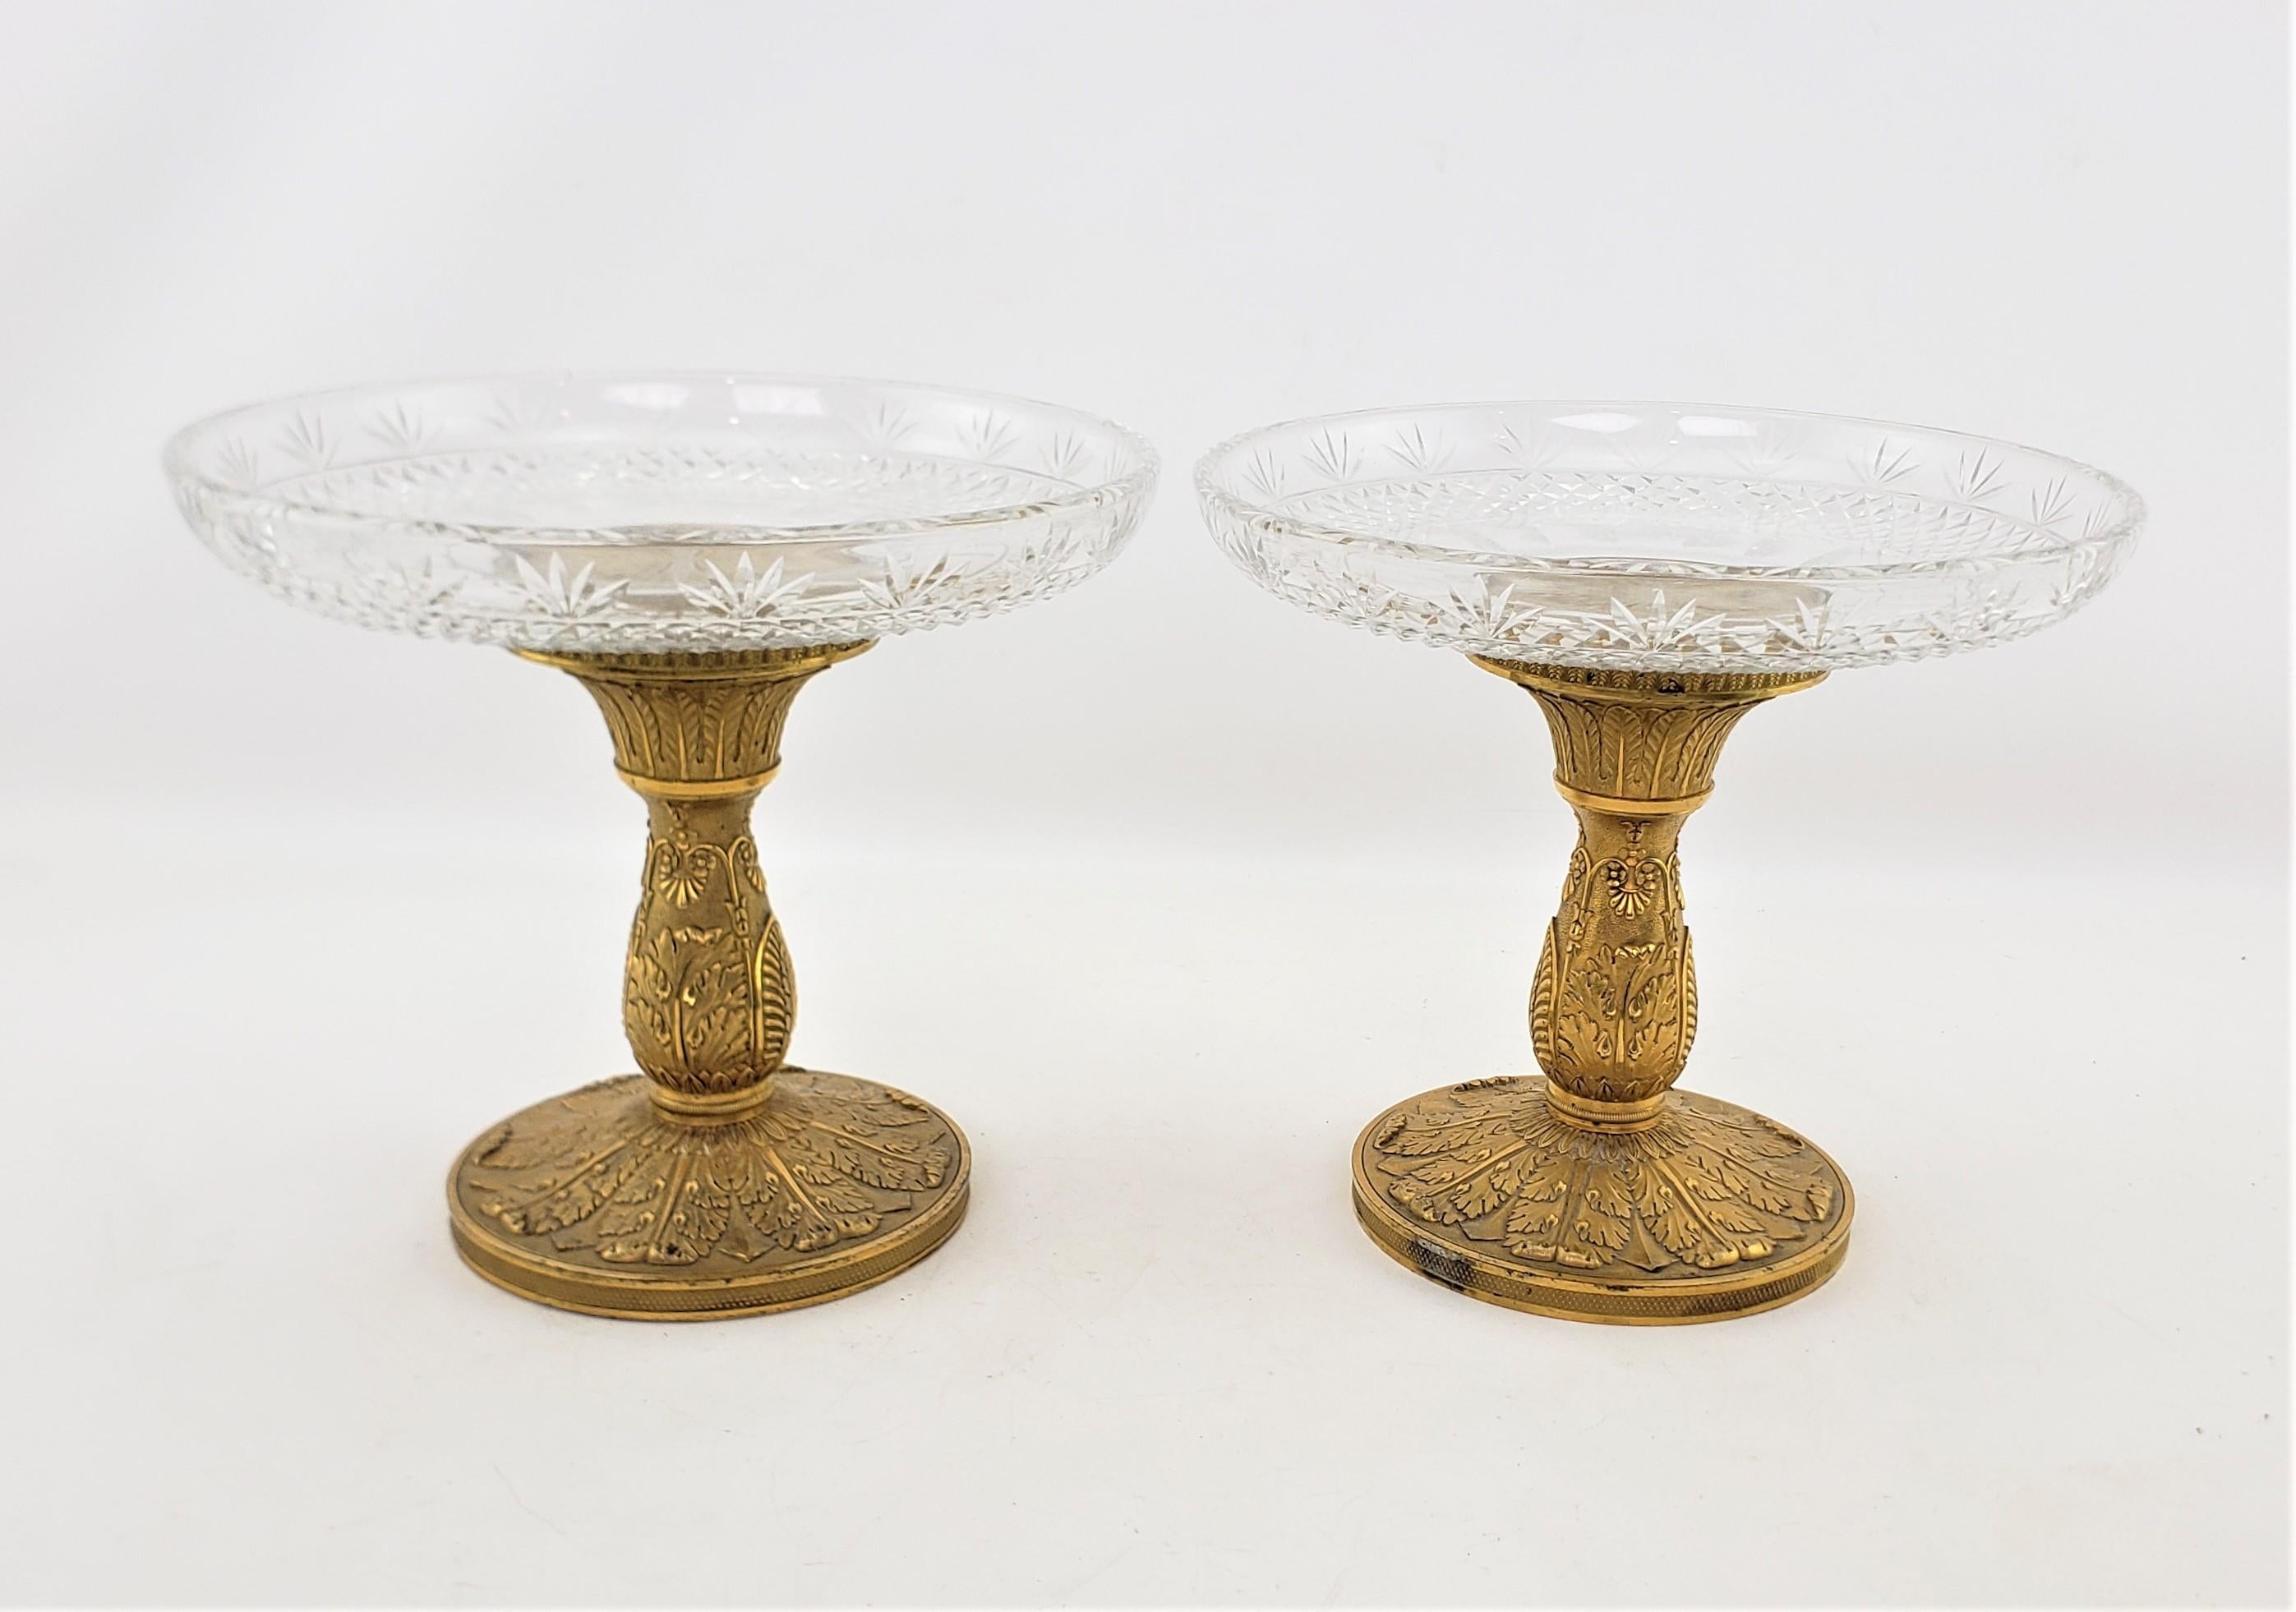 Pair of Antique Gilt Bronze & Crystal Tazzas or Pedestal Bowls In Good Condition For Sale In Hamilton, Ontario